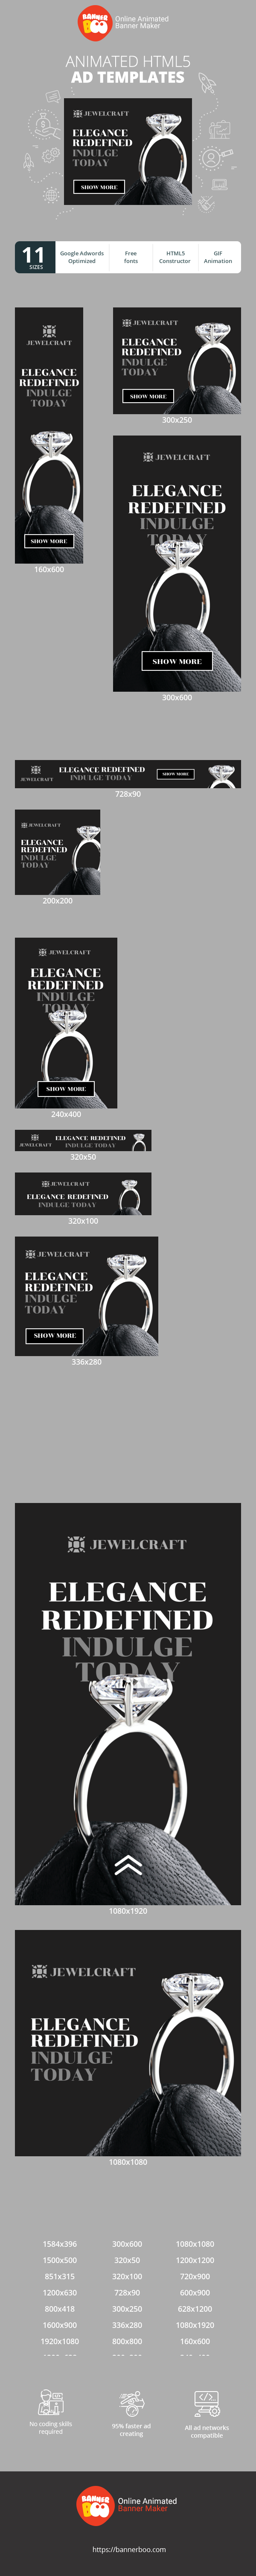 Banner ad template — Elegance Redefined Indulge Today — Jewelry